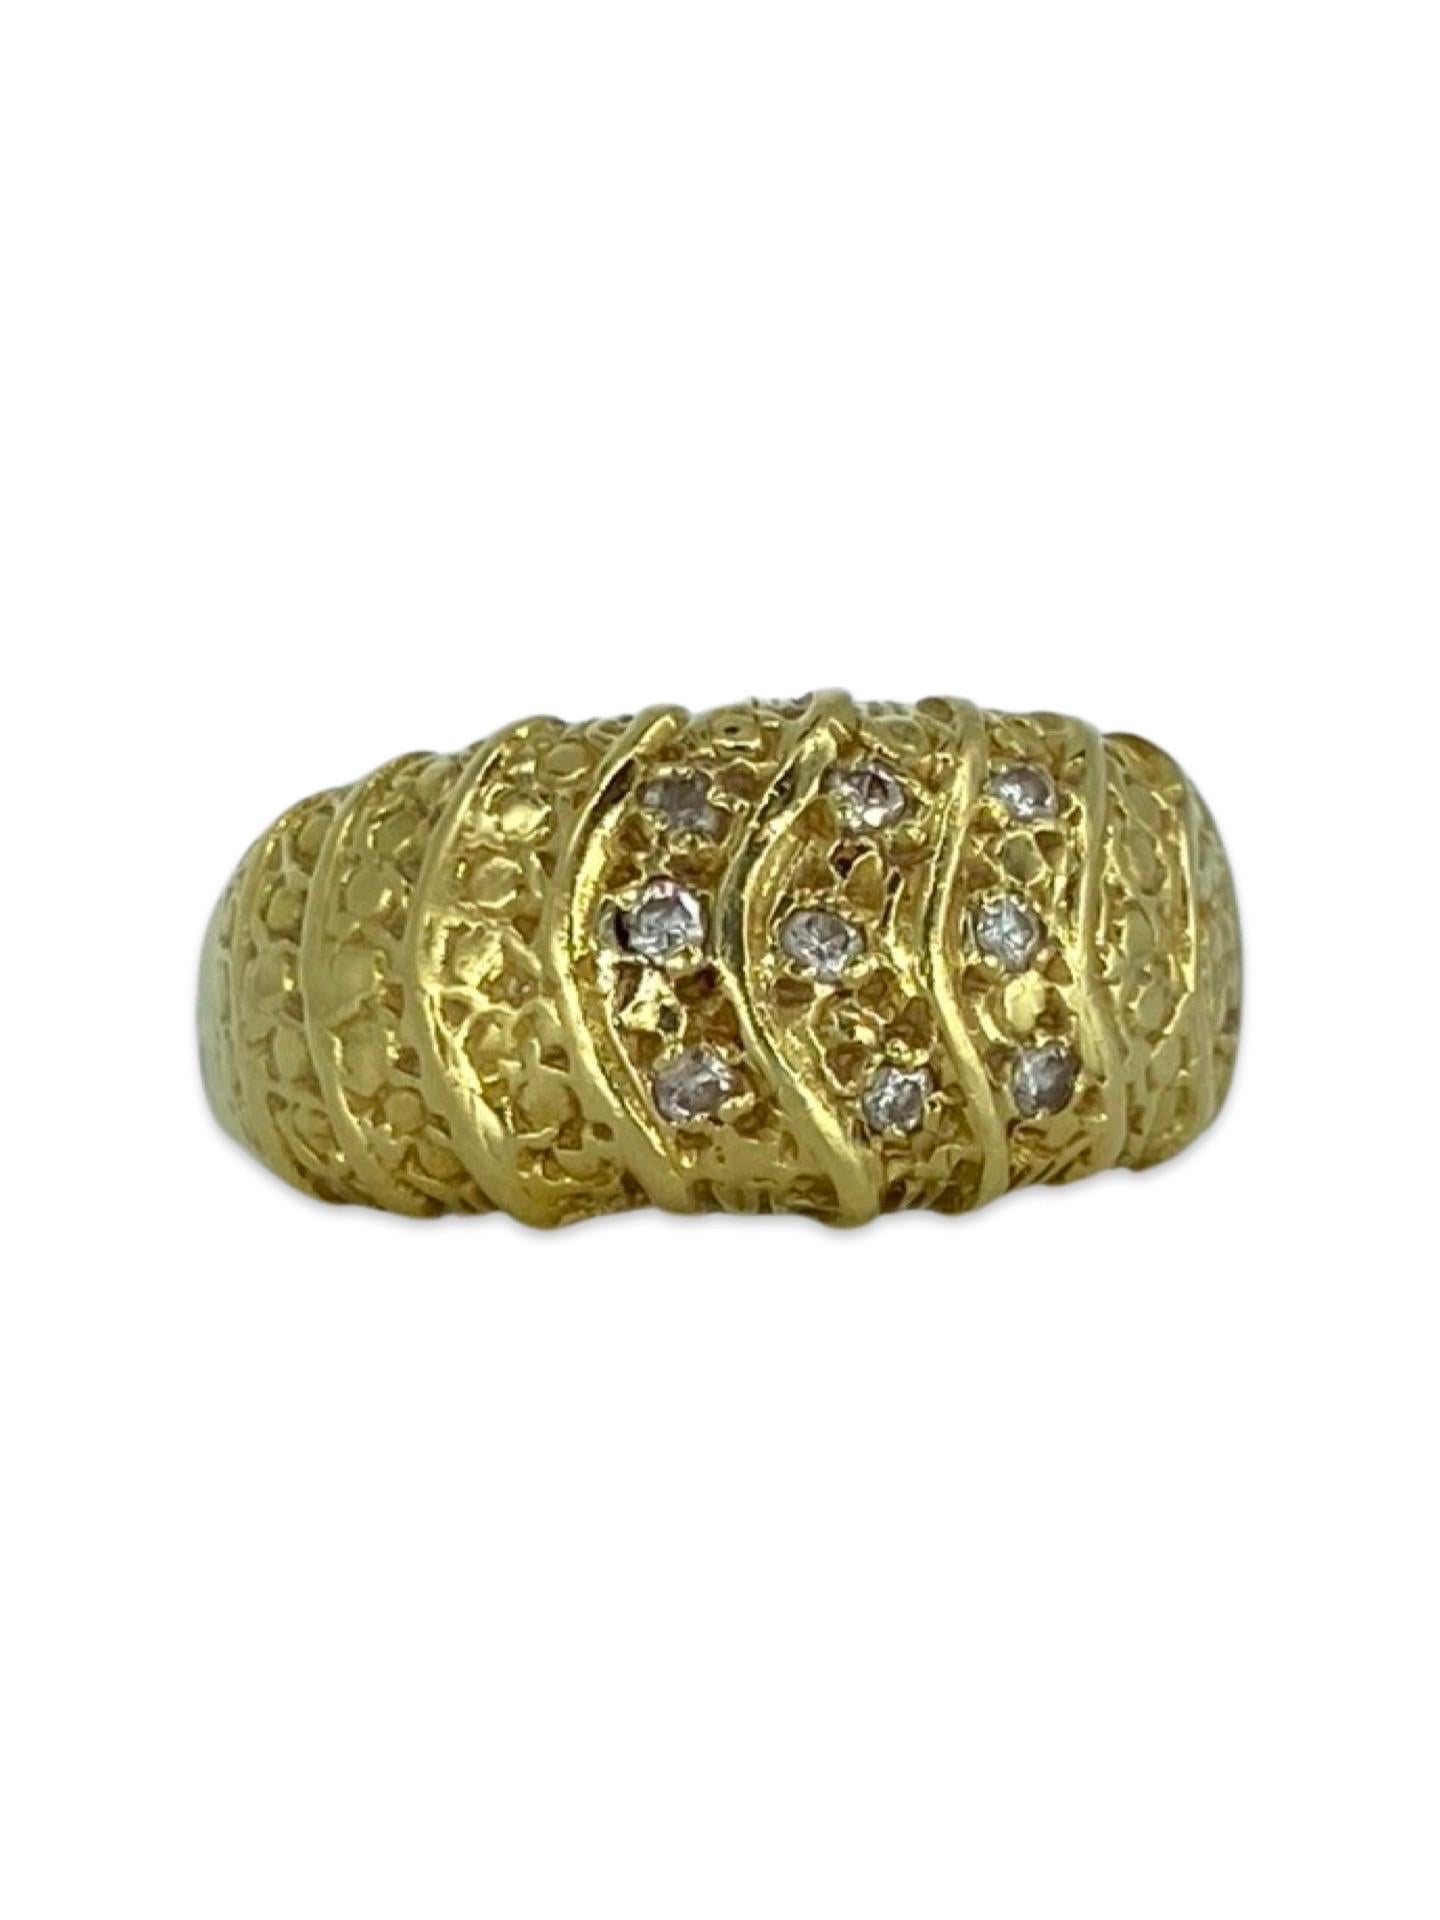 Vintage 0.10 Carat Diamonds Hammered Design Ring 18k Gold  In Good Condition For Sale In Miami, FL